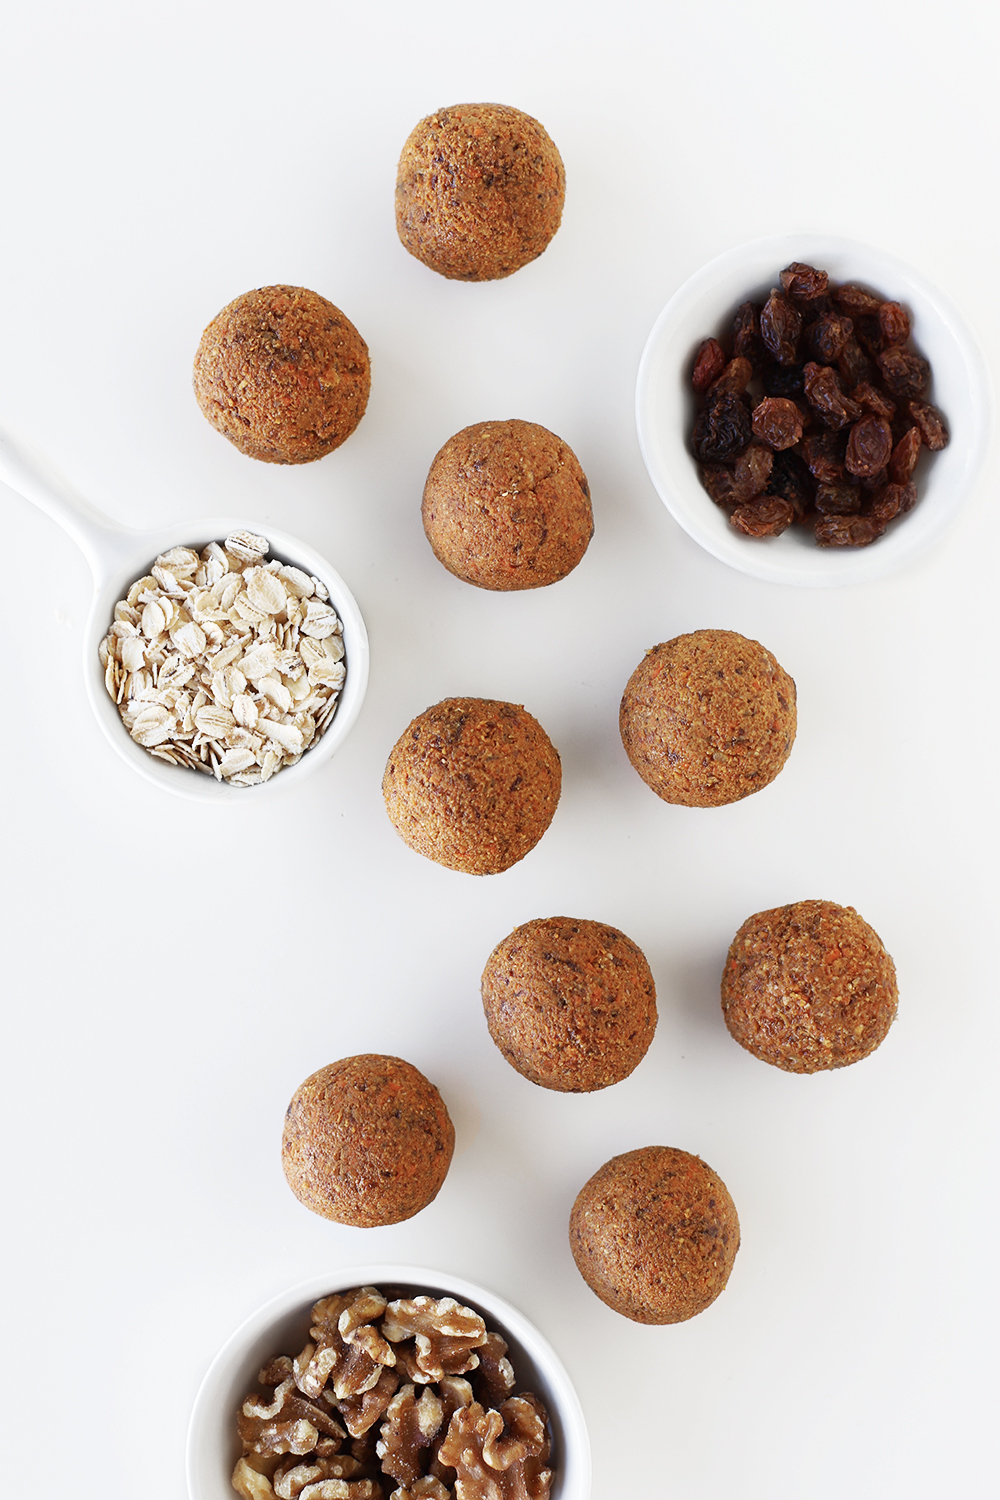 Carrot cake energy bite bliss balls and the healthy 5 ingredients they're made from in bowls: sulatnas/raisins, oatmeal, cinnamon, walnuts